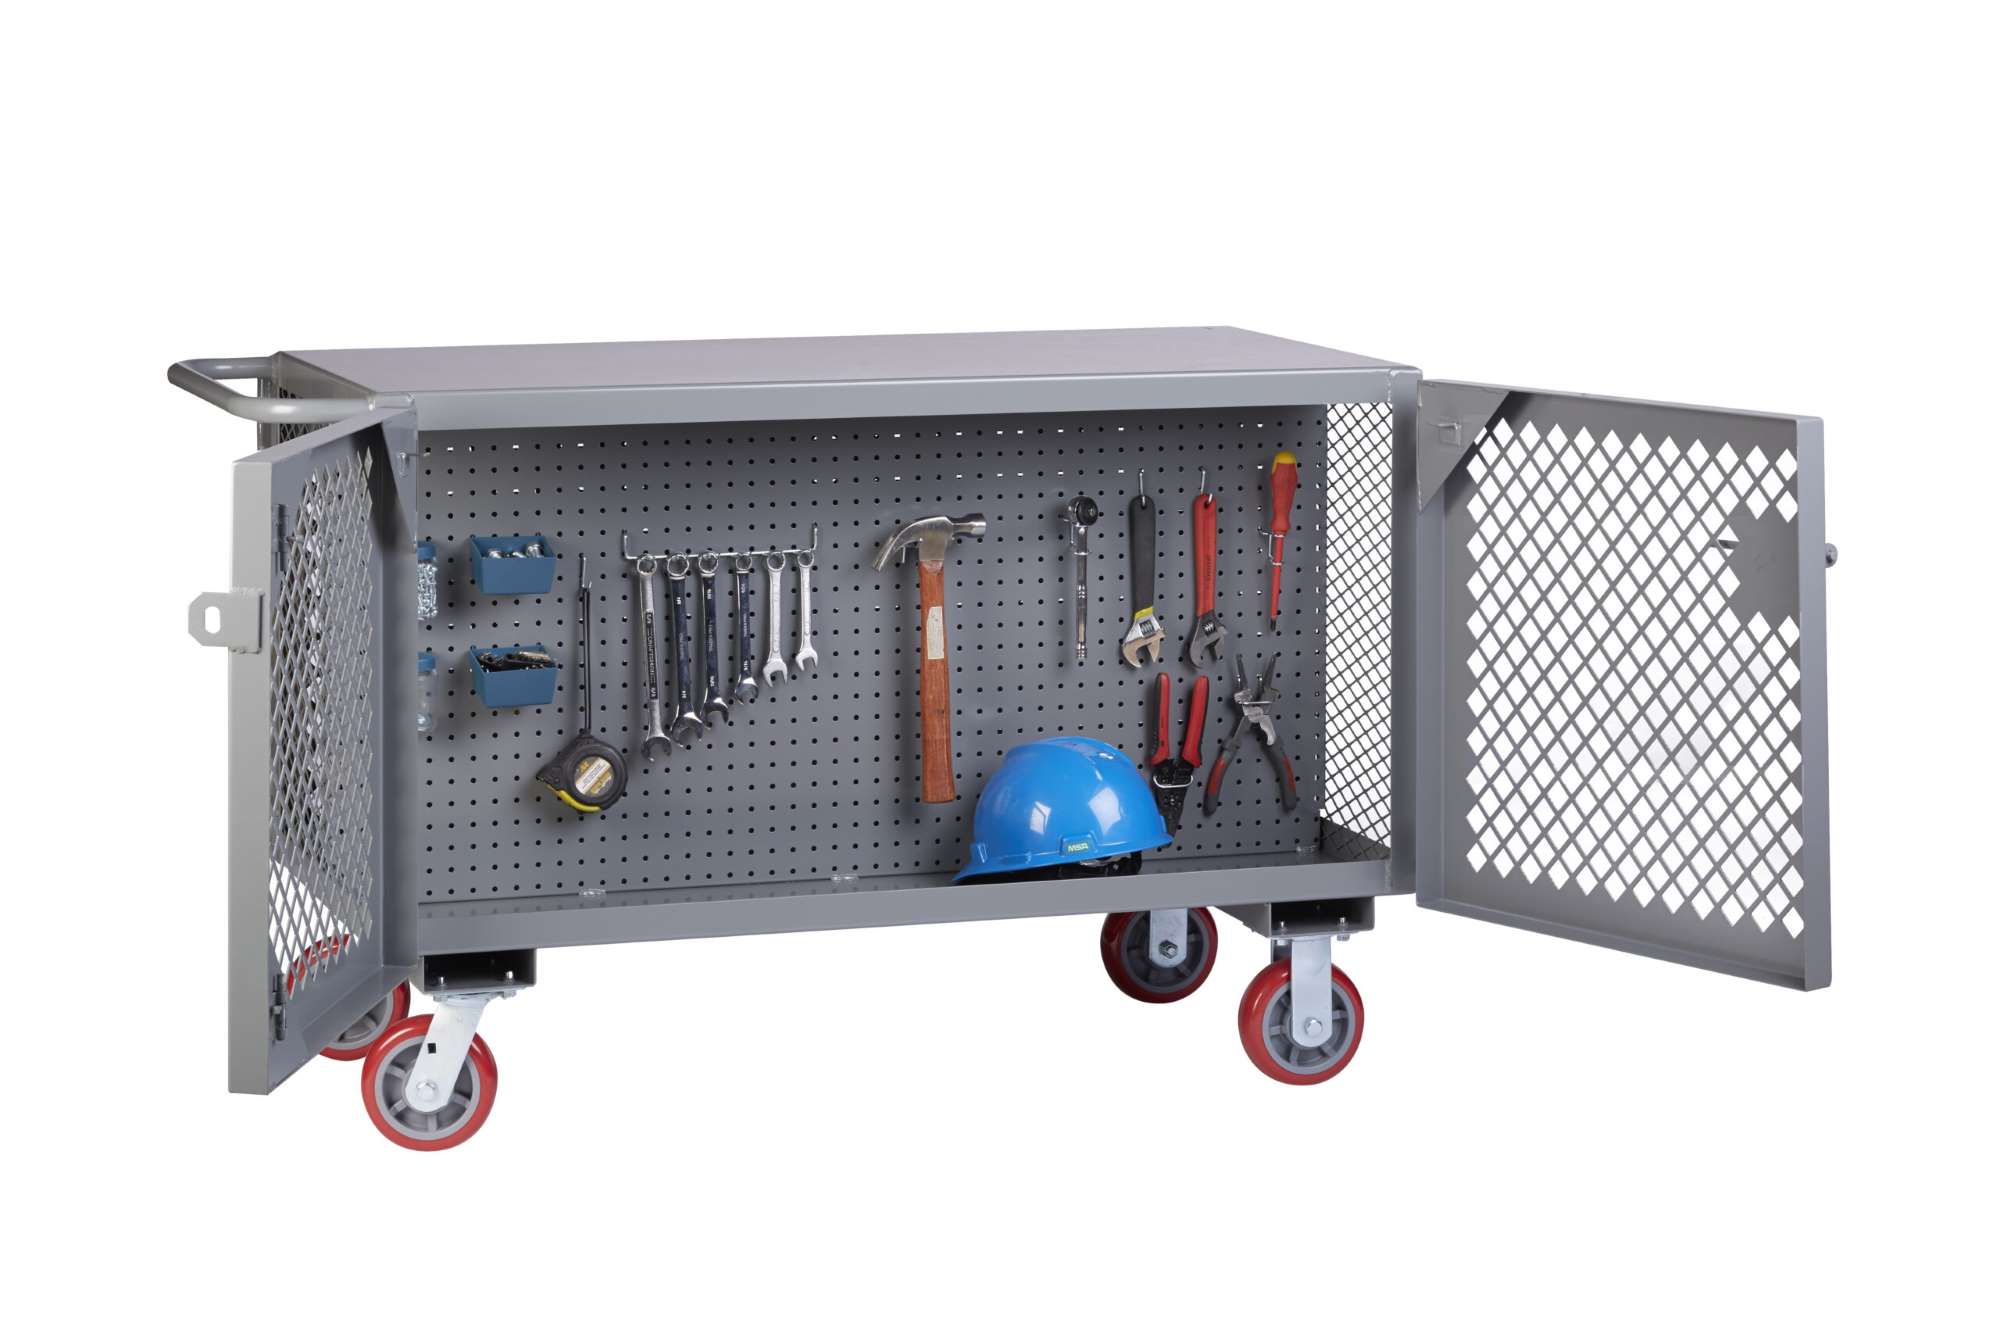 Little Giant 2-sided mobile maintenance cart, Pegboard, Louvered panels, 3600 lbs capacity, Overall height 33", 6" wheels